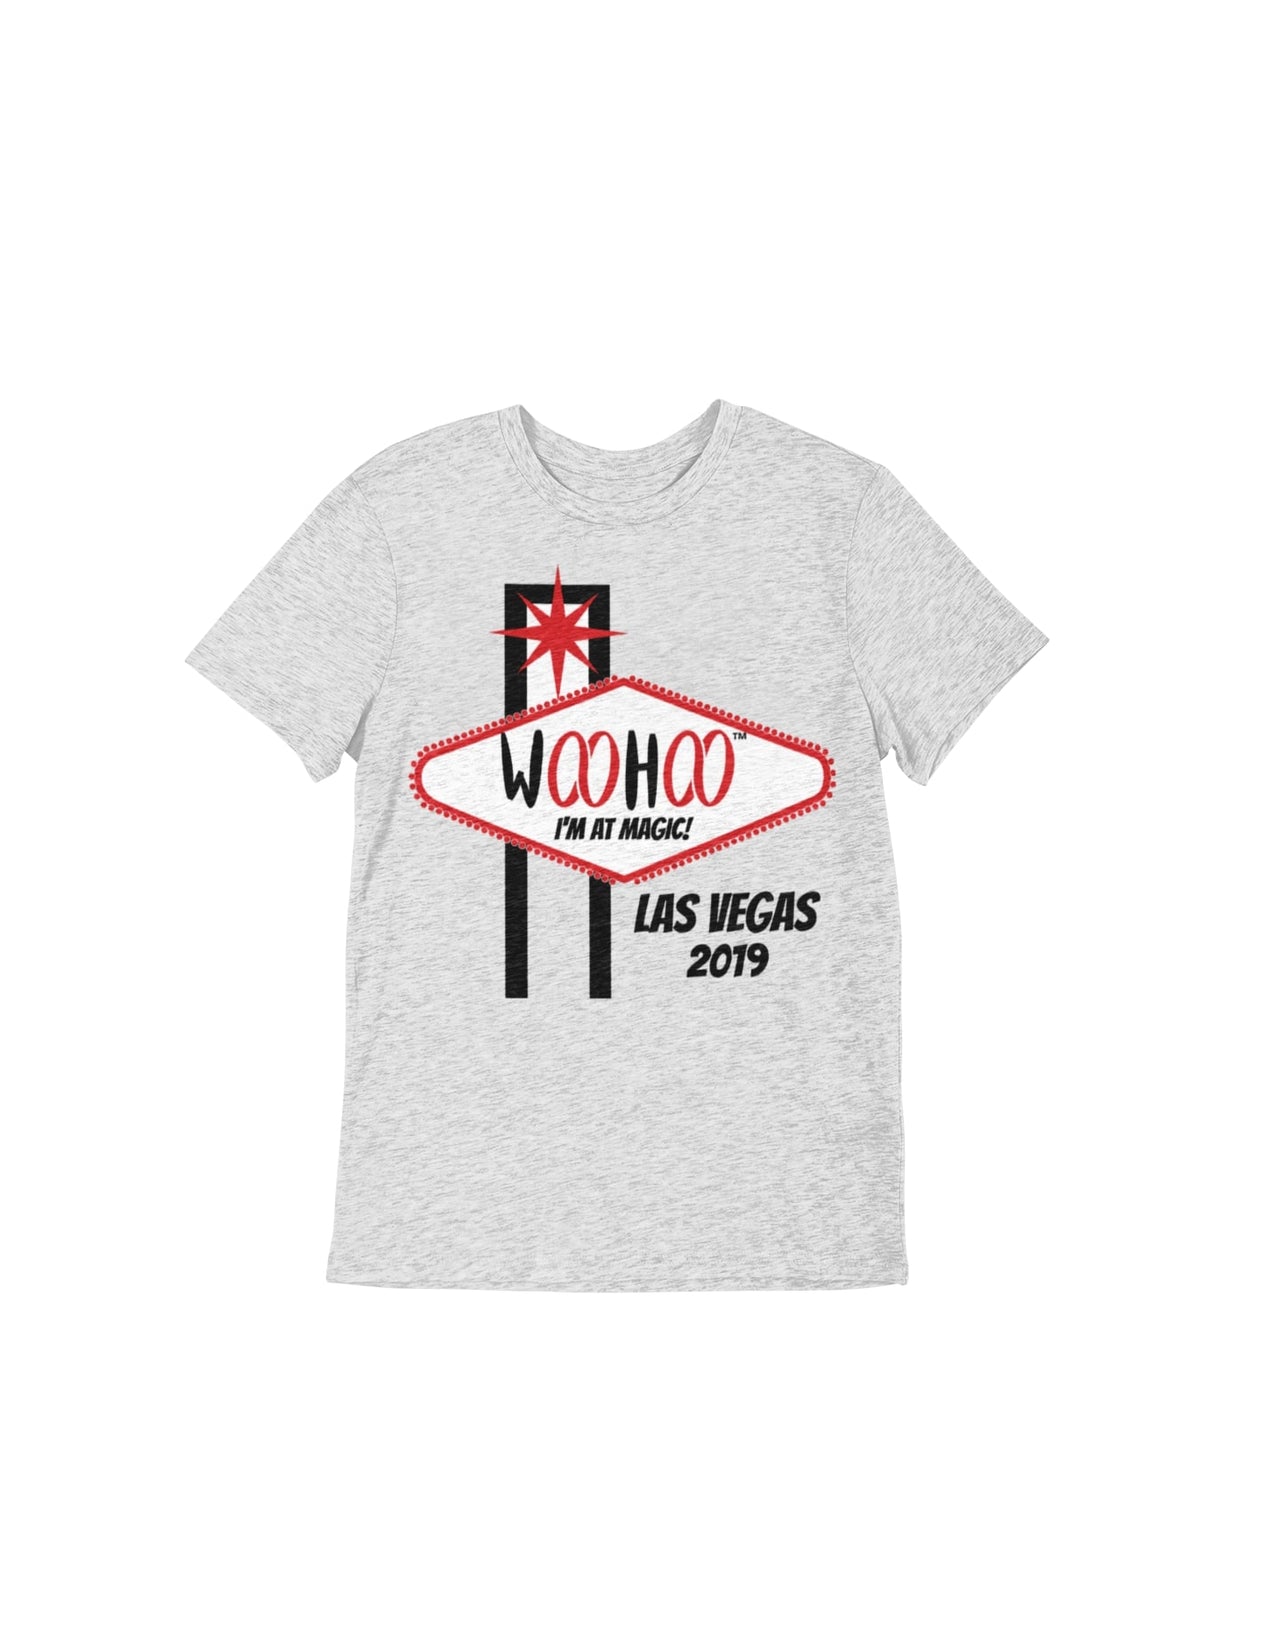 Heather Gray Unisex T-shirt featuring the Las Vegas sign with the text 'WooHoo is magic.' Designed by WooHoo Apparel."